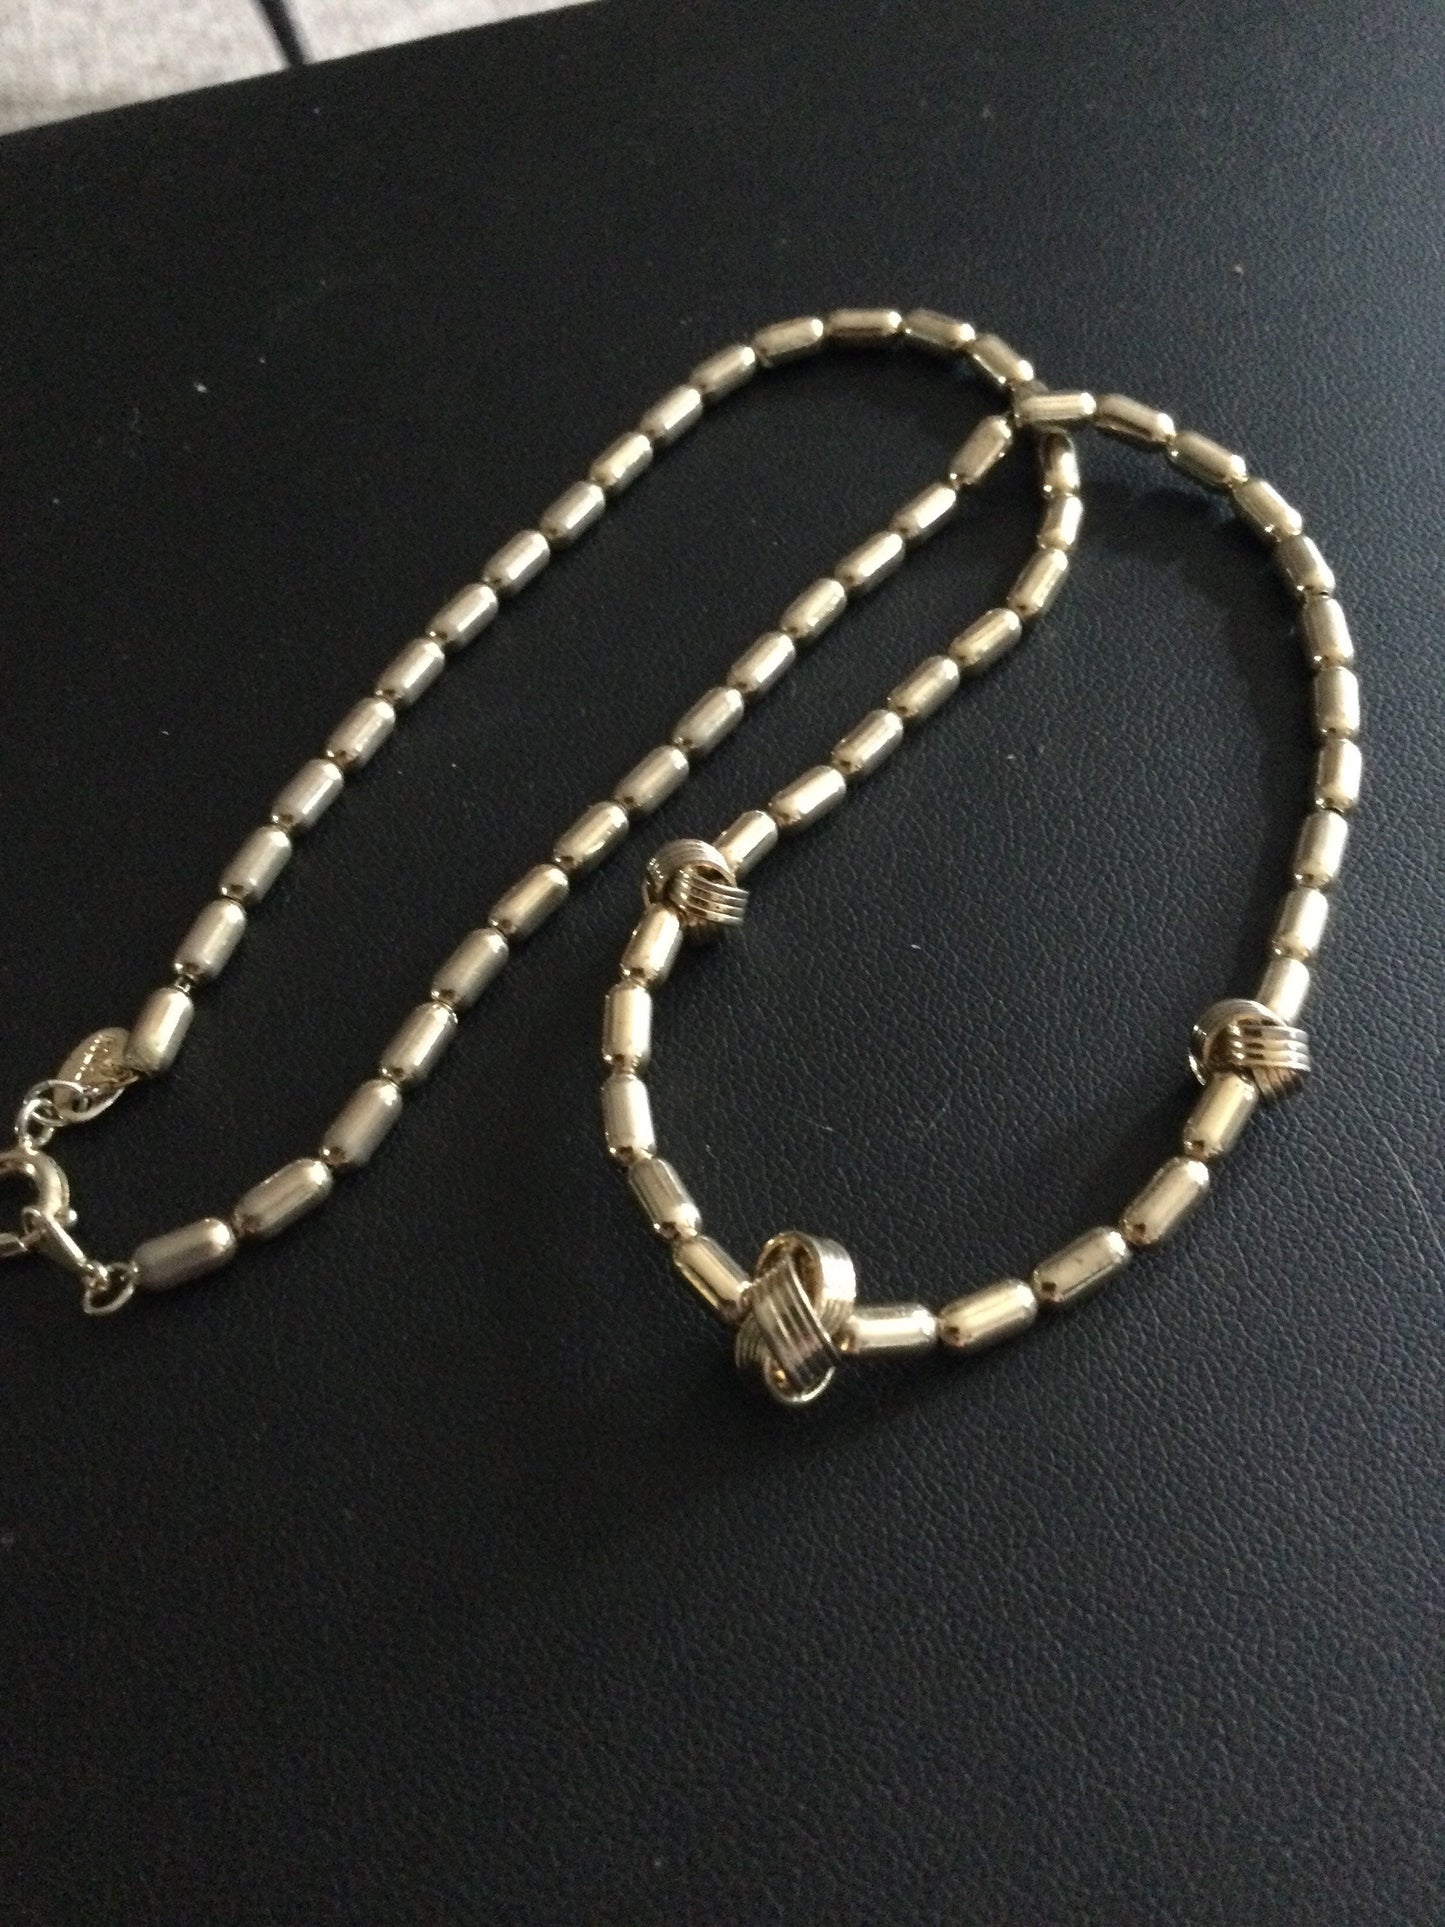 Signed CITATION beaded gold chain knot necklace